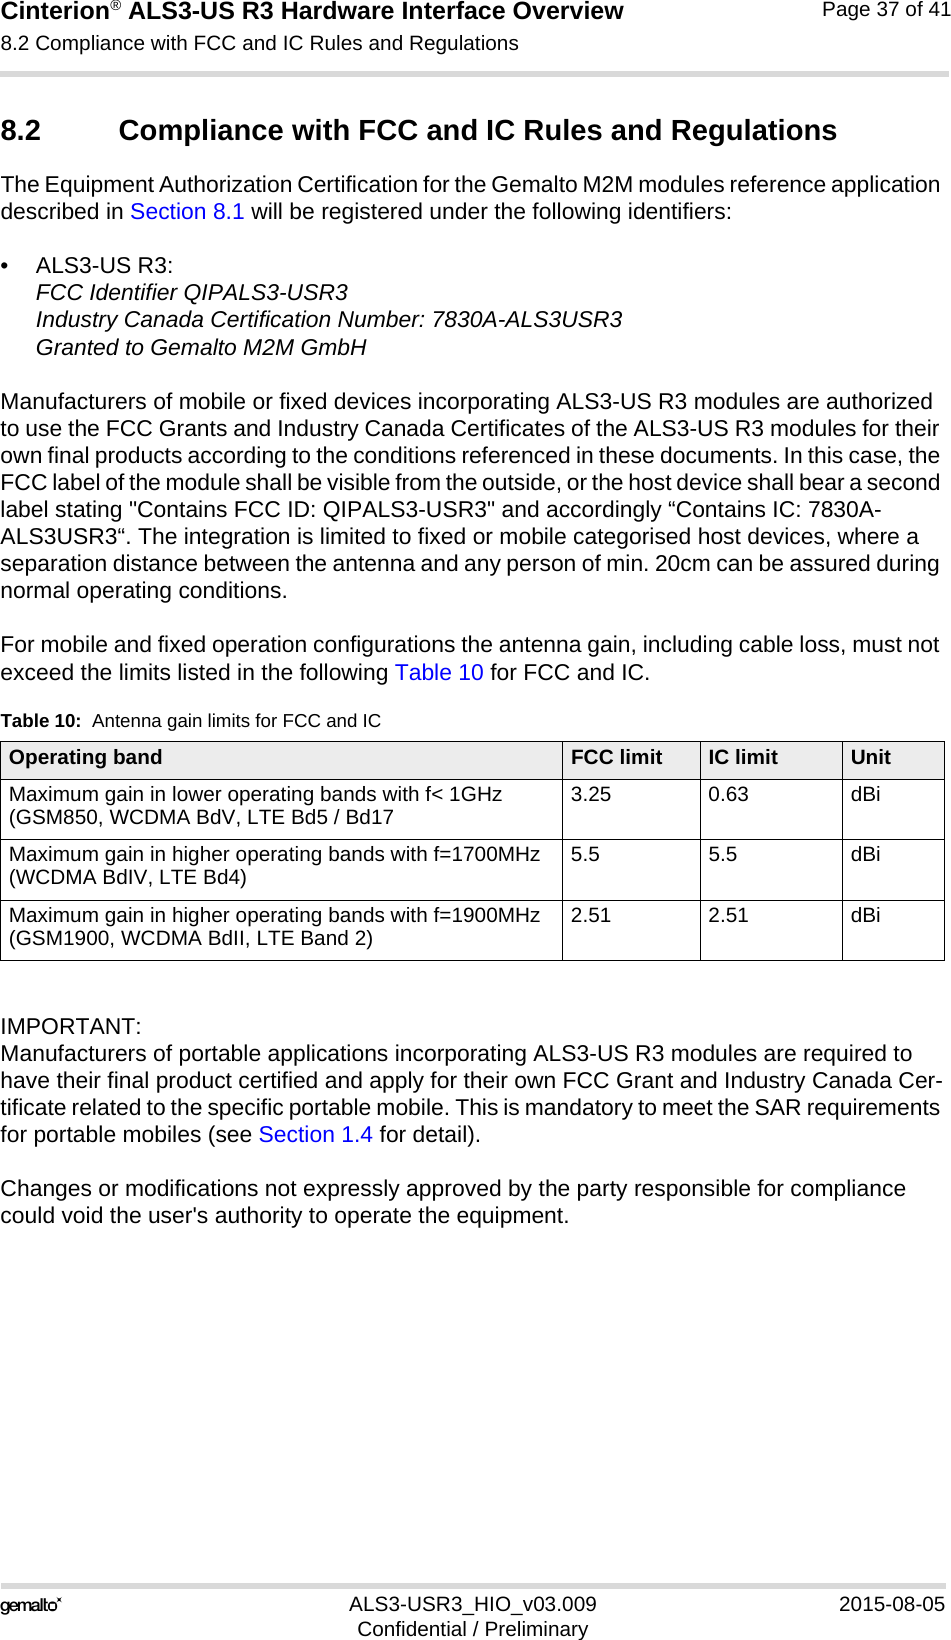 Cinterion® ALS3-US R3 Hardware Interface Overview8.2 Compliance with FCC and IC Rules and Regulations38ALS3-USR3_HIO_v03.009 2015-08-05Confidential / PreliminaryPage 37 of 418.2 Compliance with FCC and IC Rules and Regulations The Equipment Authorization Certification for the Gemalto M2M modules reference application described in Section 8.1 will be registered under the following identifiers:•ALS3-US R3:FCC Identifier QIPALS3-USR3Industry Canada Certification Number: 7830A-ALS3USR3Granted to Gemalto M2M GmbH Manufacturers of mobile or fixed devices incorporating ALS3-US R3 modules are authorized to use the FCC Grants and Industry Canada Certificates of the ALS3-US R3 modules for their own final products according to the conditions referenced in these documents. In this case, the FCC label of the module shall be visible from the outside, or the host device shall bear a second label stating &quot;Contains FCC ID: QIPALS3-USR3&quot; and accordingly “Contains IC: 7830A-ALS3USR3“. The integration is limited to fixed or mobile categorised host devices, where a separation distance between the antenna and any person of min. 20cm can be assured during normal operating conditions. For mobile and fixed operation configurations the antenna gain, including cable loss, must not exceed the limits listed in the following Table 10 for FCC and IC.IMPORTANT:Manufacturers of portable applications incorporating ALS3-US R3 modules are required to have their final product certified and apply for their own FCC Grant and Industry Canada Cer-tificate related to the specific portable mobile. This is mandatory to meet the SAR requirements for portable mobiles (see Section 1.4 for detail).Changes or modifications not expressly approved by the party responsible for compliance could void the user&apos;s authority to operate the equipment.Table 10:  Antenna gain limits for FCC and ICOperating band FCC limit IC limit UnitMaximum gain in lower operating bands with f&lt; 1GHz(GSM850, WCDMA BdV, LTE Bd5 / Bd17 3.25 0.63 dBiMaximum gain in higher operating bands with f=1700MHz(WCDMA BdIV, LTE Bd4) 5.5 5.5 dBiMaximum gain in higher operating bands with f=1900MHz(GSM1900, WCDMA BdII, LTE Band 2) 2.51 2.51 dBi